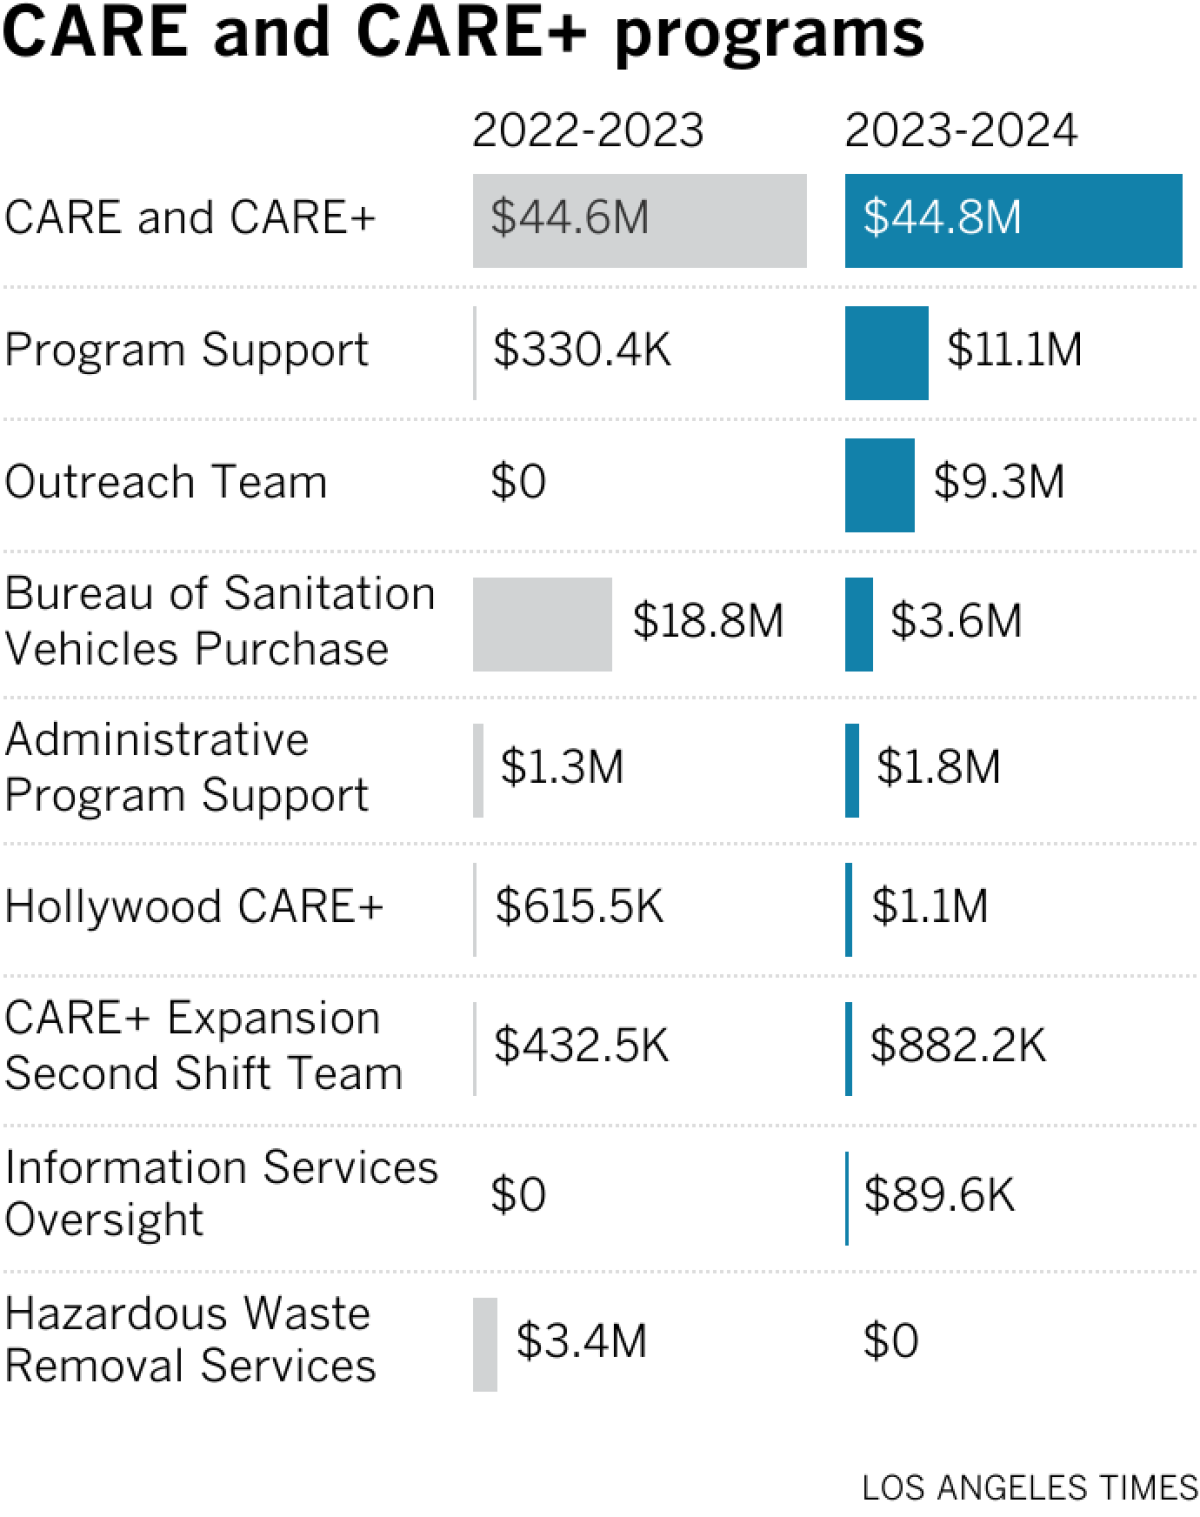 A bar chart showing funding for both CARE/CARE+ programs from 2022-2023 and 2023-2024